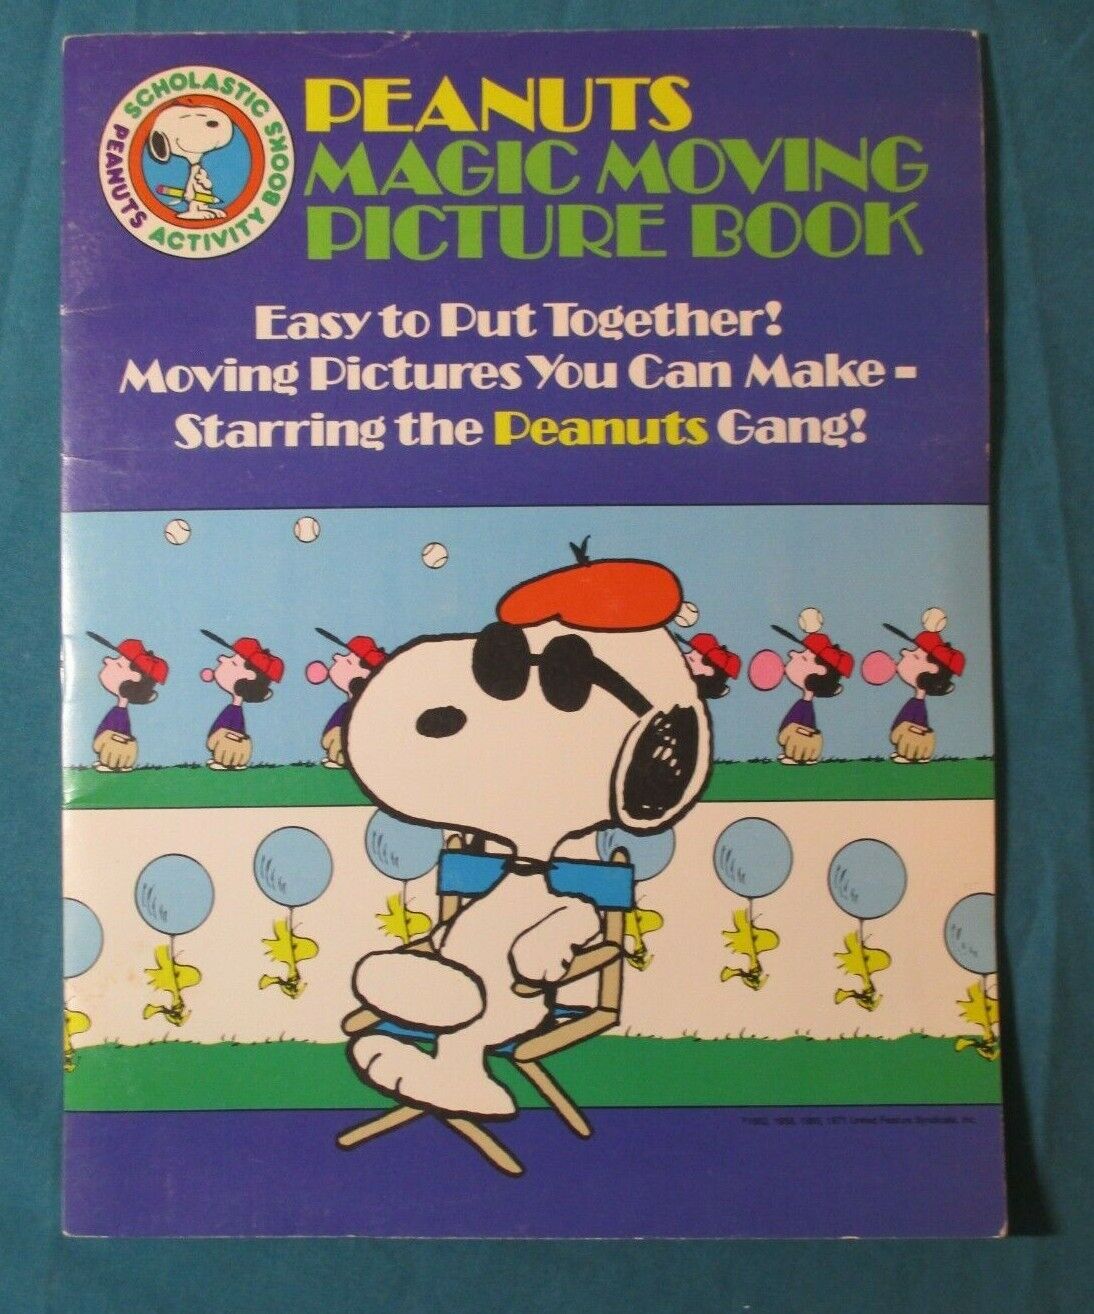 Scarce 1982 PEANUTS MAGIC MOVING PICTURE BOOK - SNOOPY Charles Schulz UN-PUNCHED